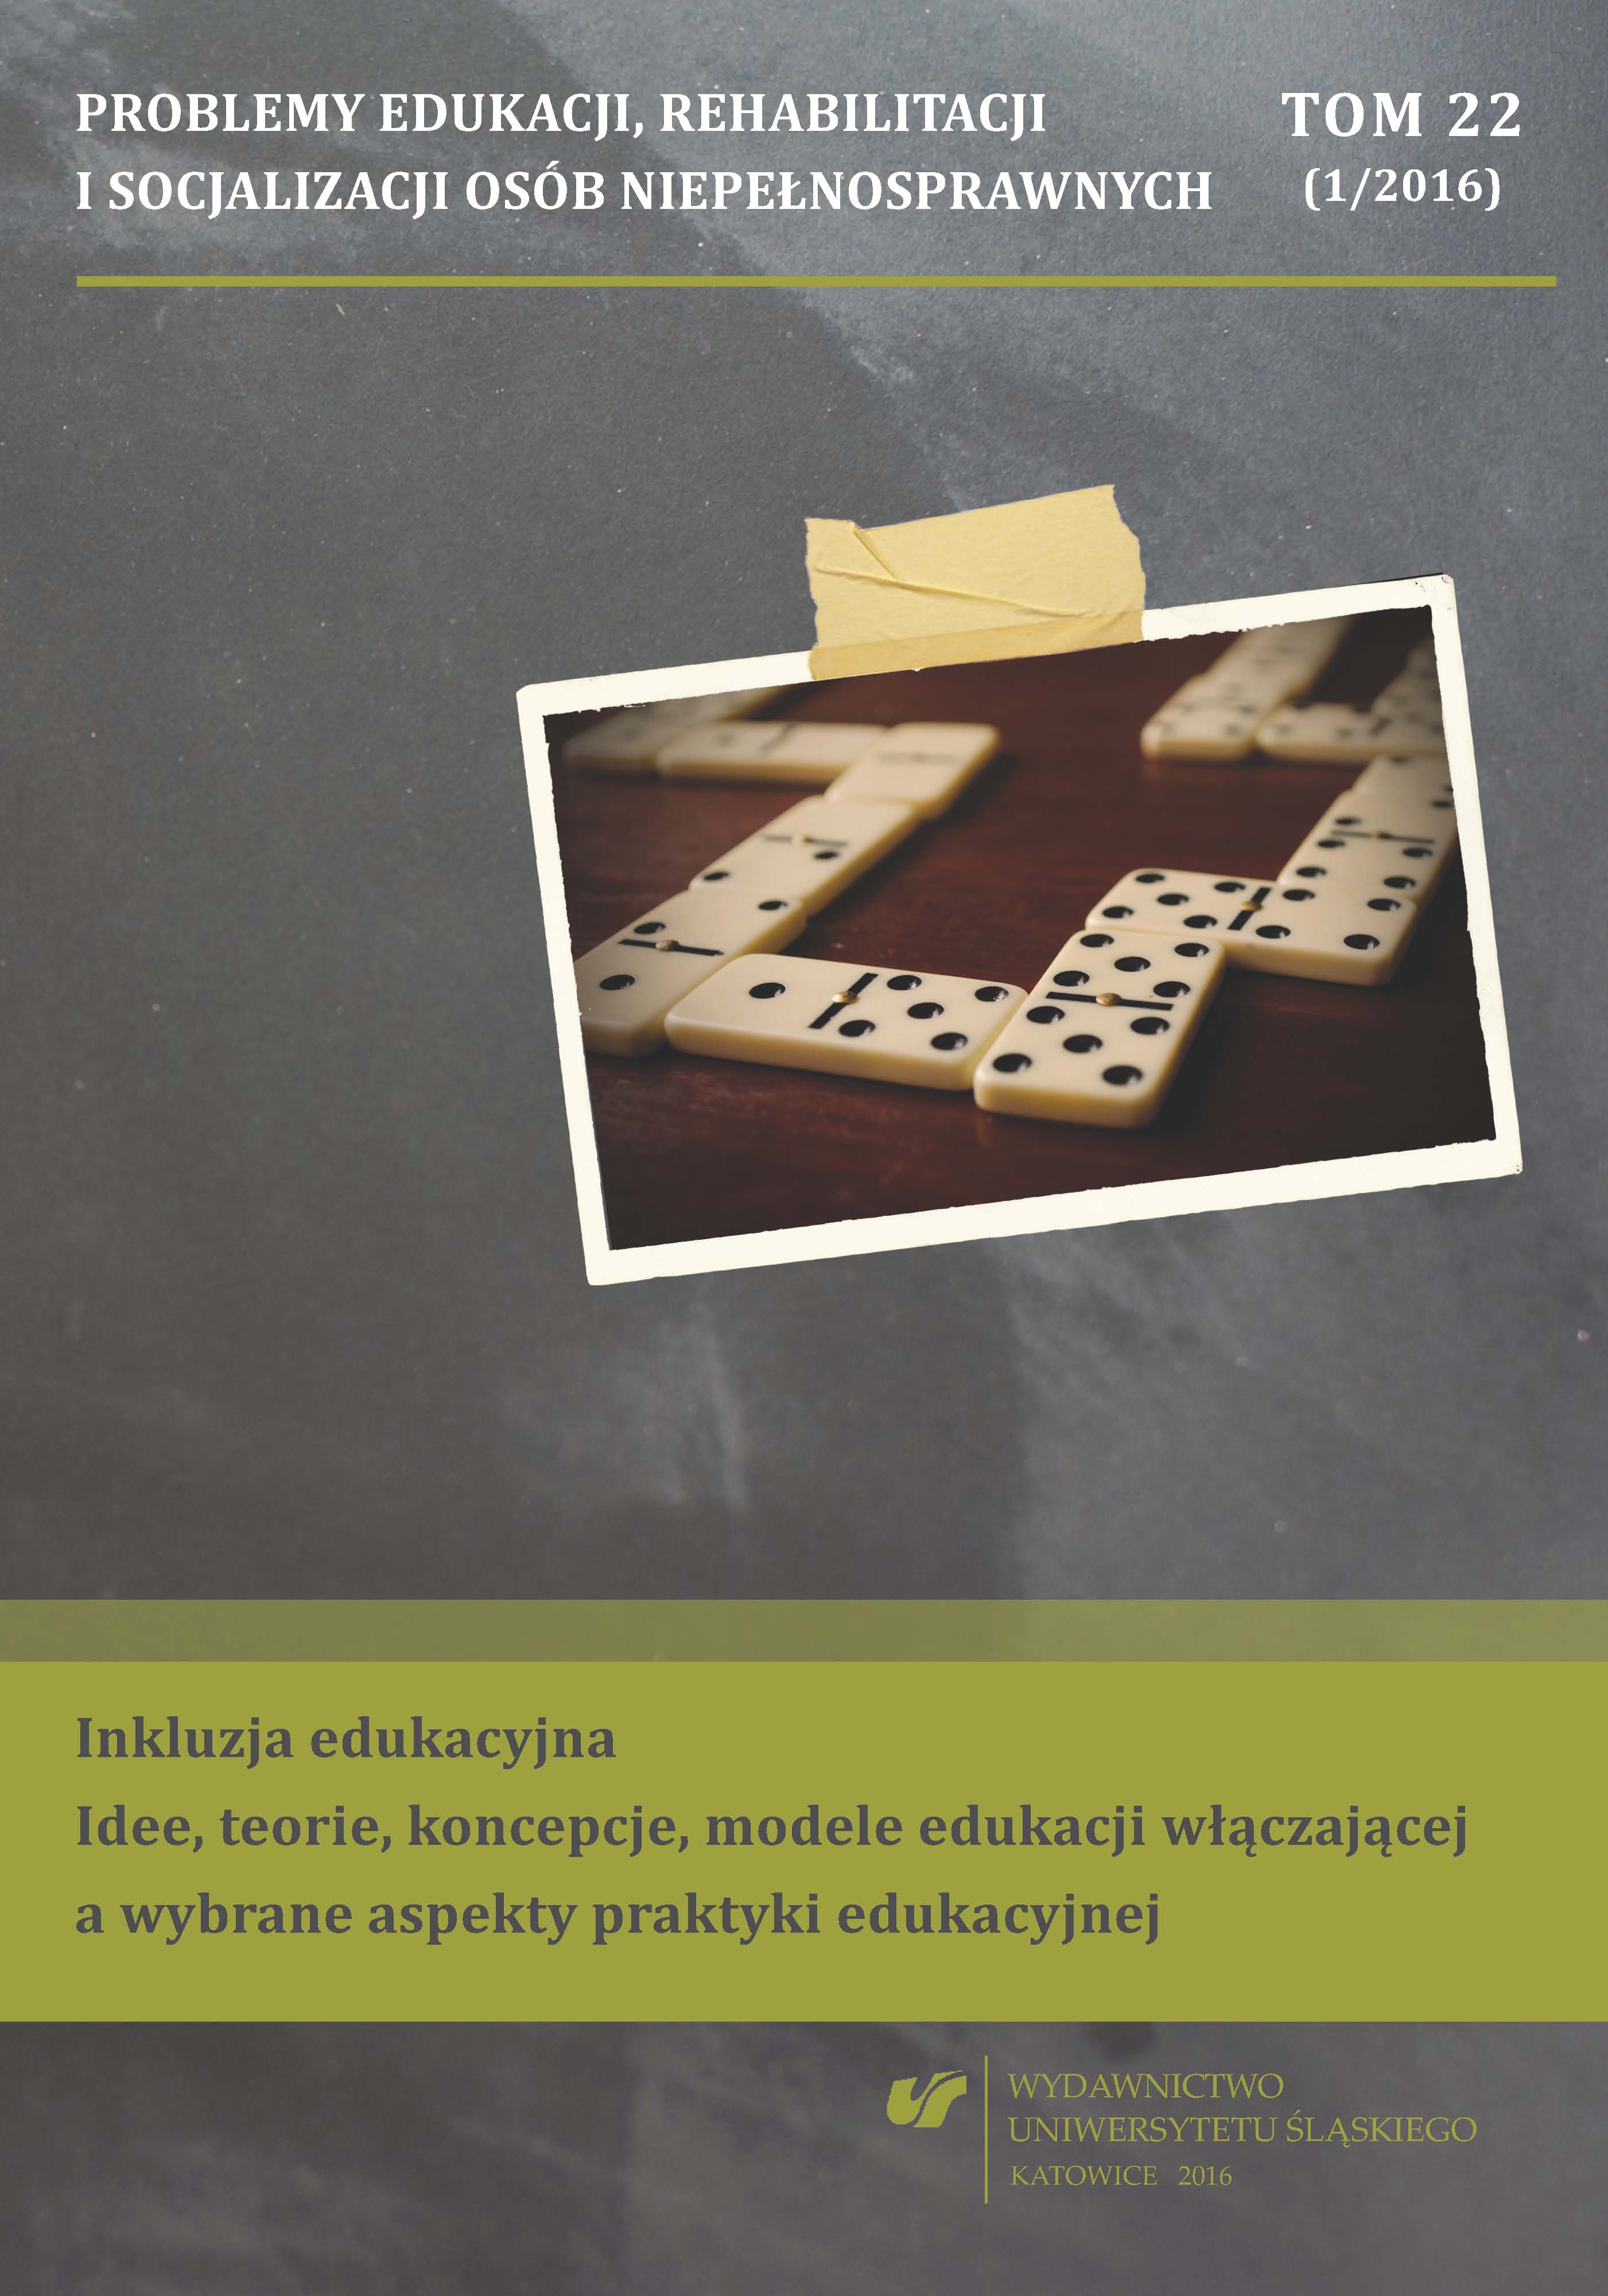 Inclusive education in the opinion of teachers of early school education – segmentation analysis. A research report Cover Image